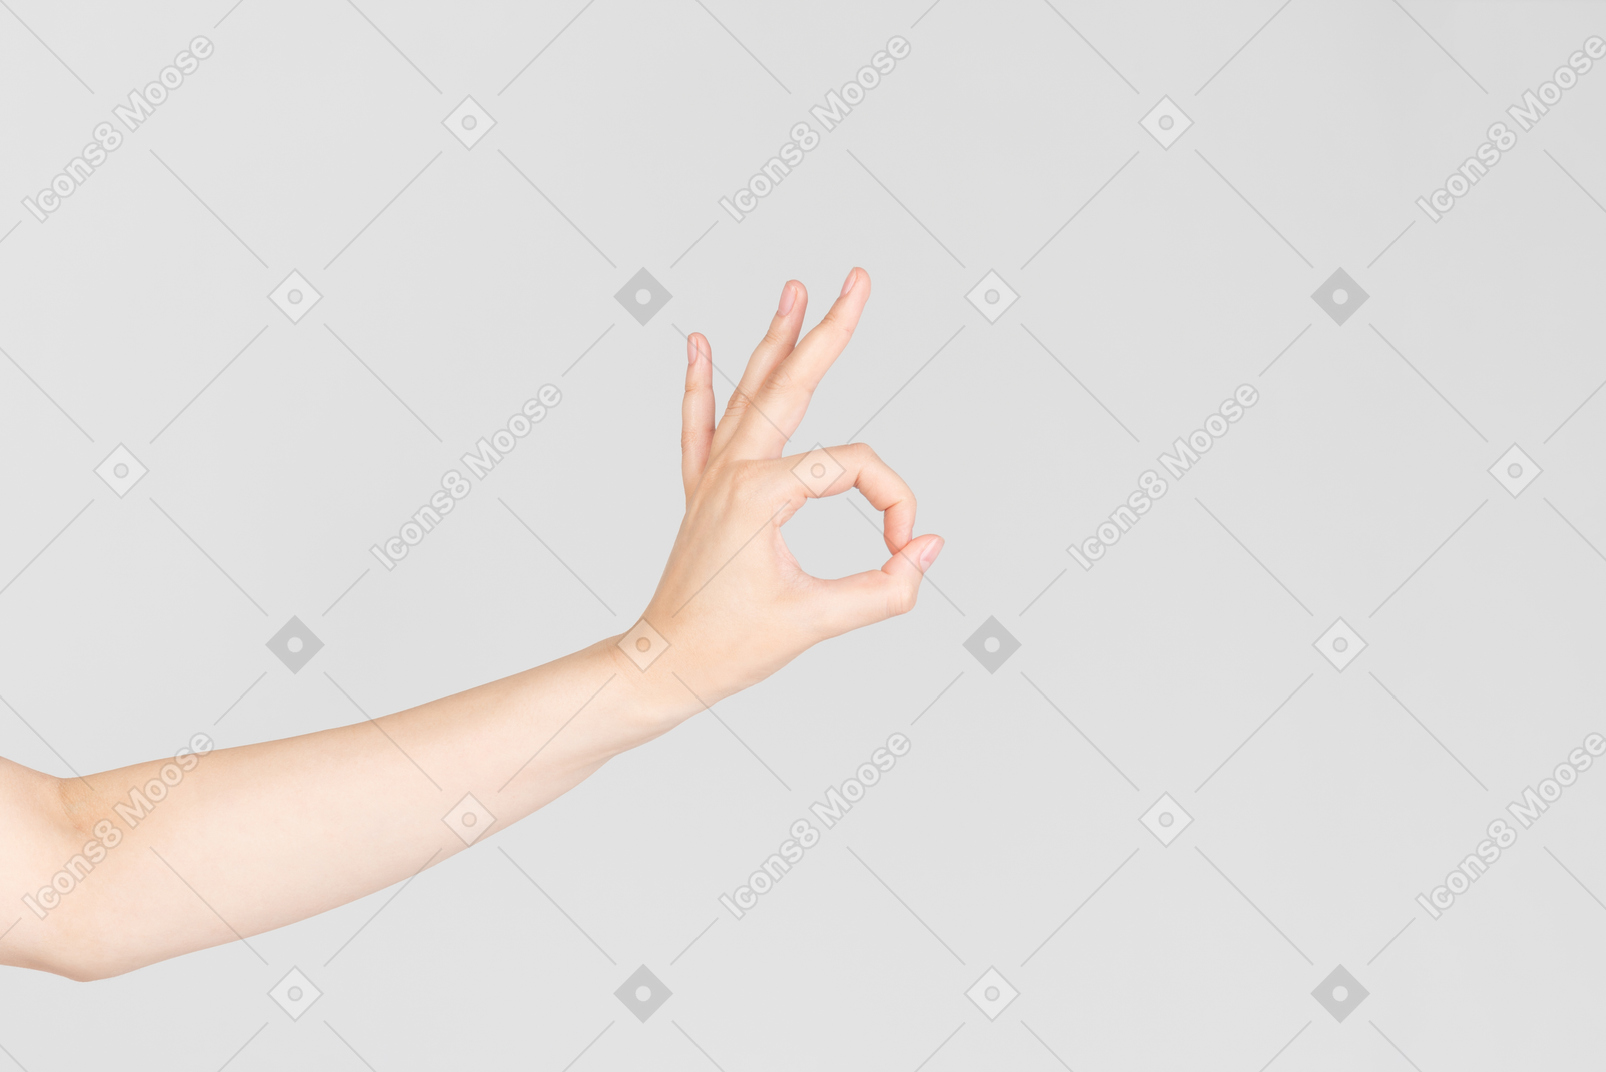 Female hands clapped together